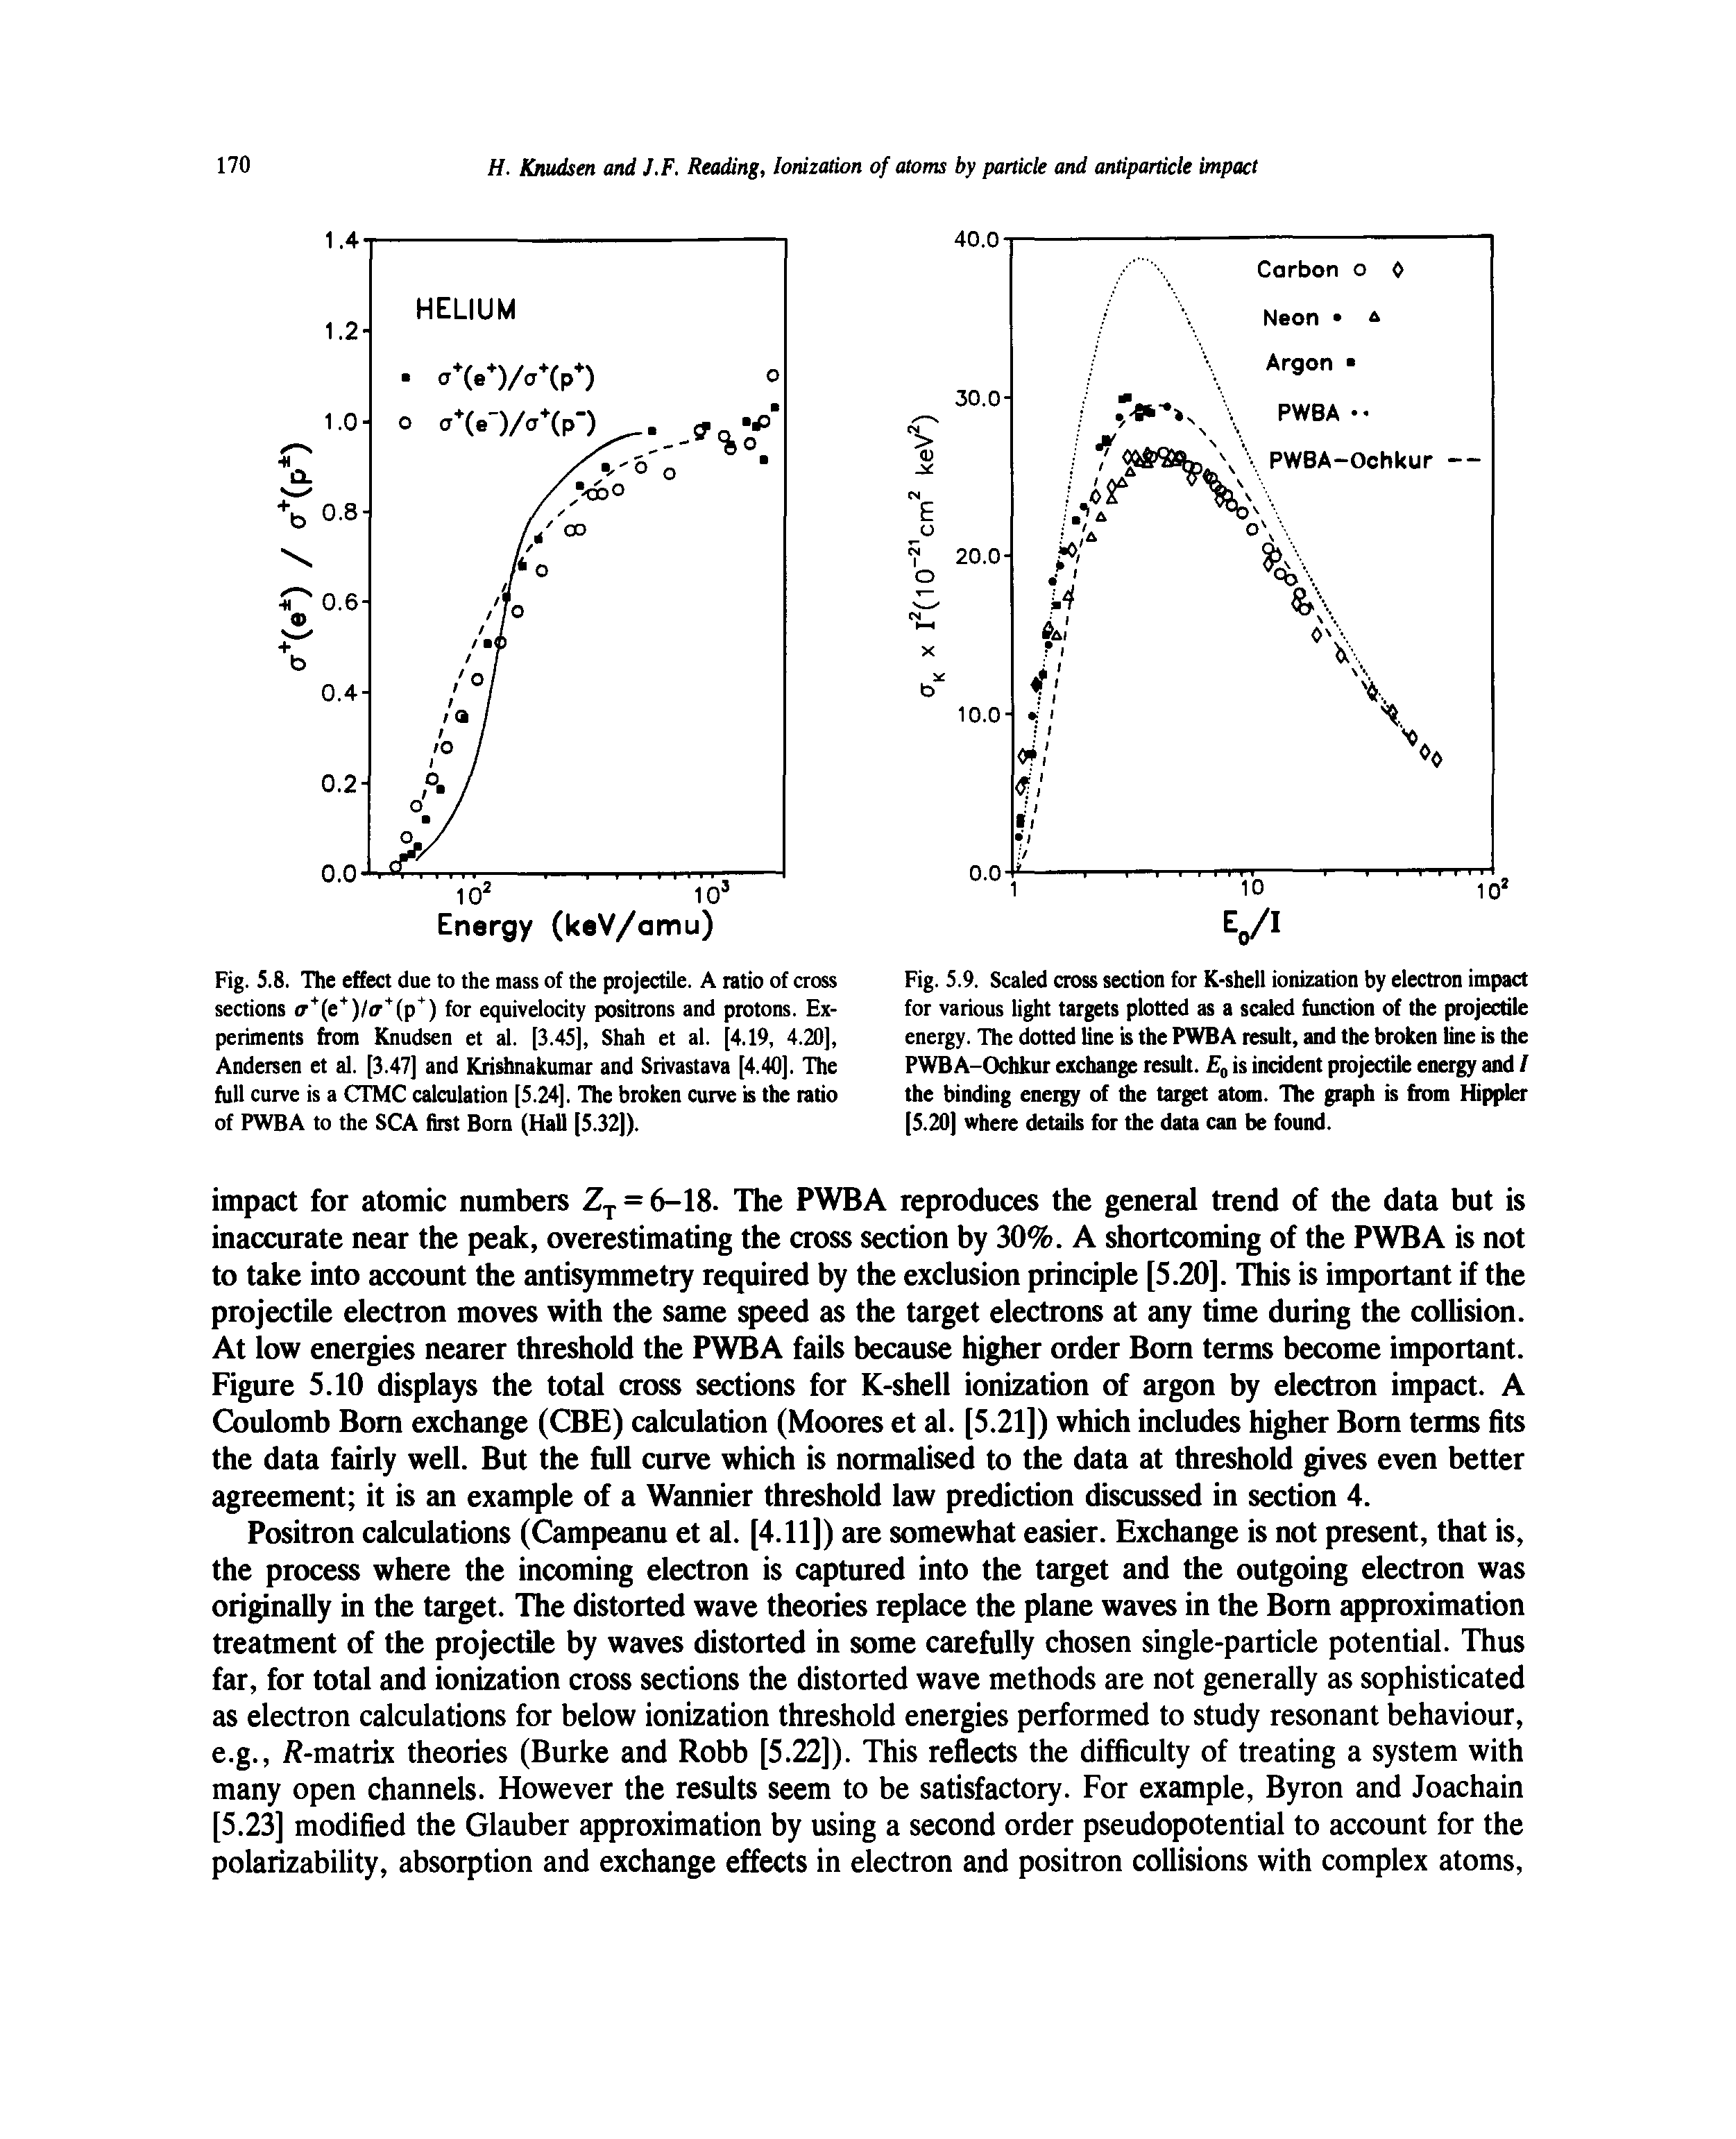 Fig. 5.9. Scaled cross section for K-shell ionization by electron impact for various light targets plotted as a scaled function of the projectile energy. The dotted line is the PWBA result, and the broken line is the PWBA-Ochkur exchange result. , is incident projectile energy and I the binding energy of die target atom. The graph is from Hippier [5.20] where details for the data can be found.